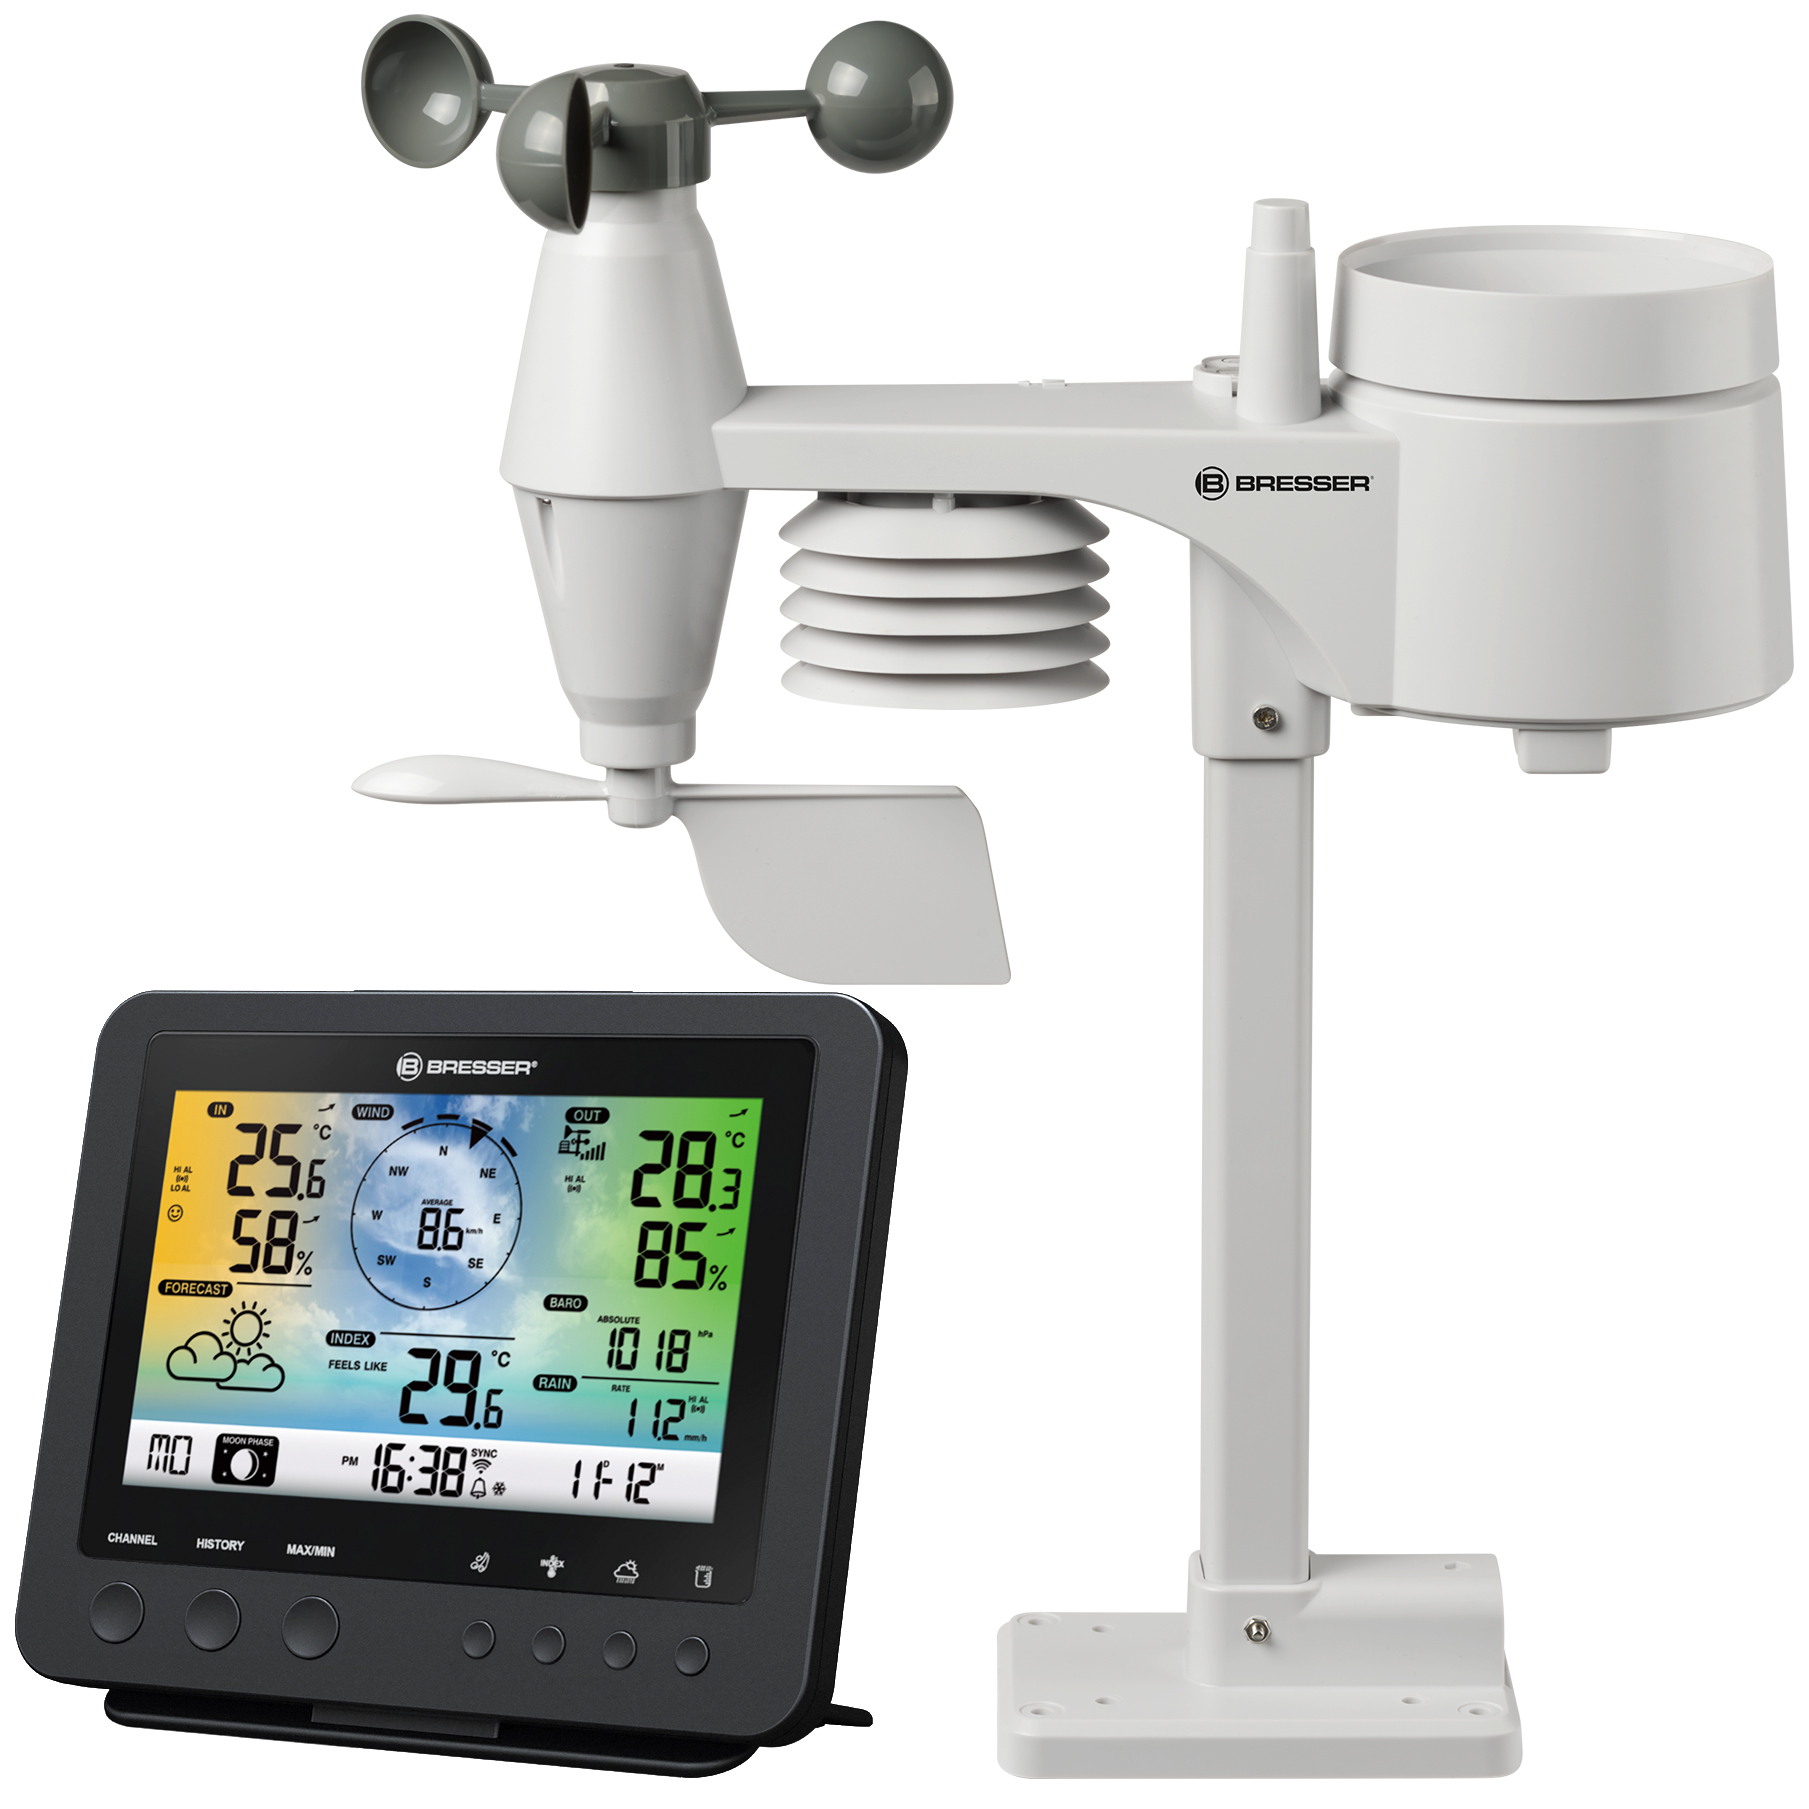 BRESSER Wi-Fi Colour Weather Station with 5-in-1 Professional Sensor